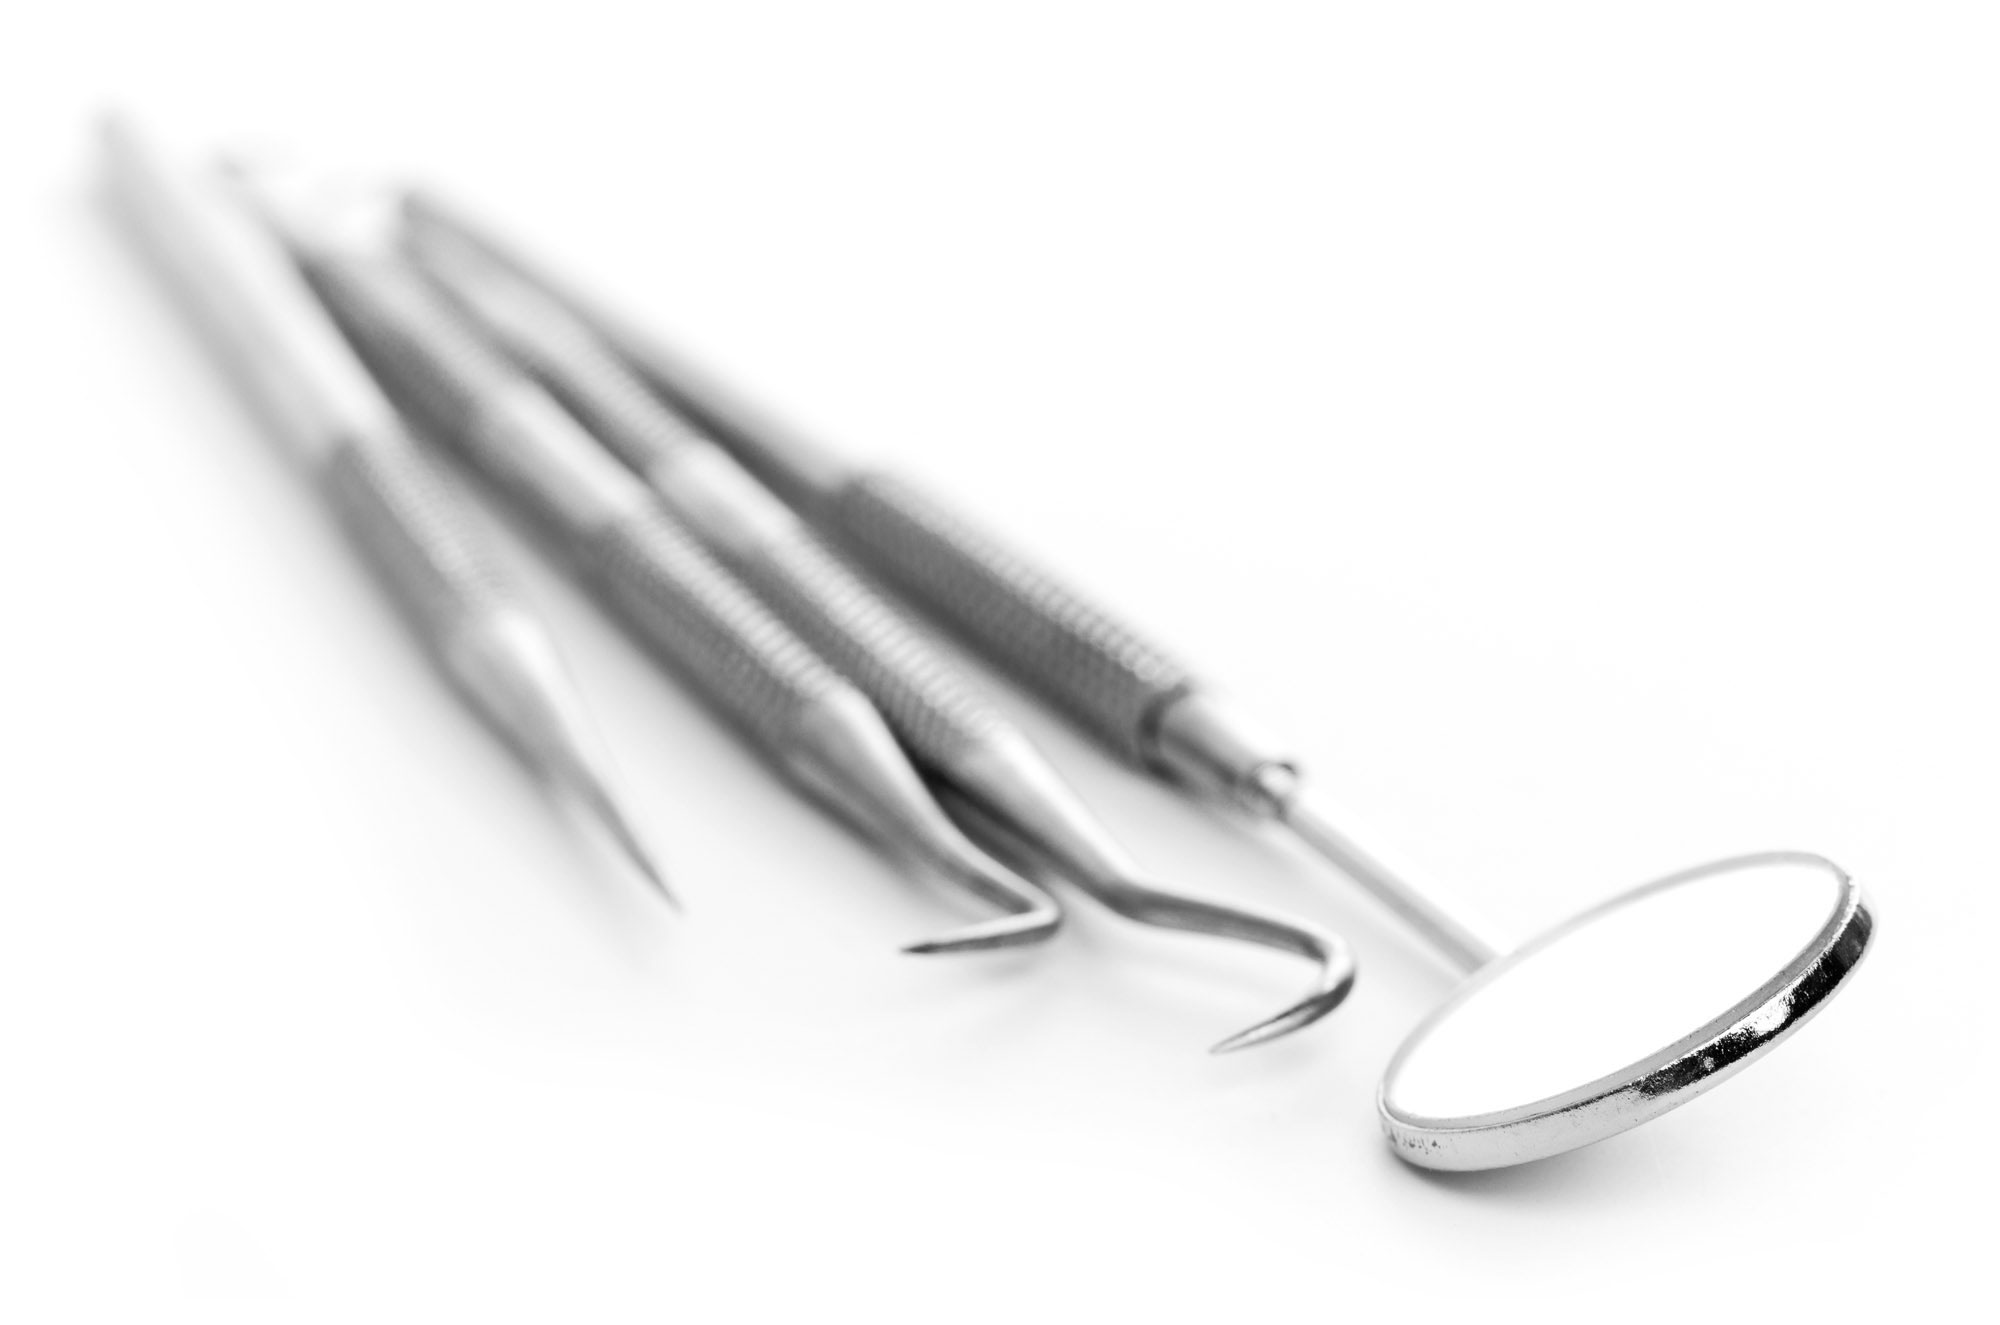 dental instruments for dealing with cavities